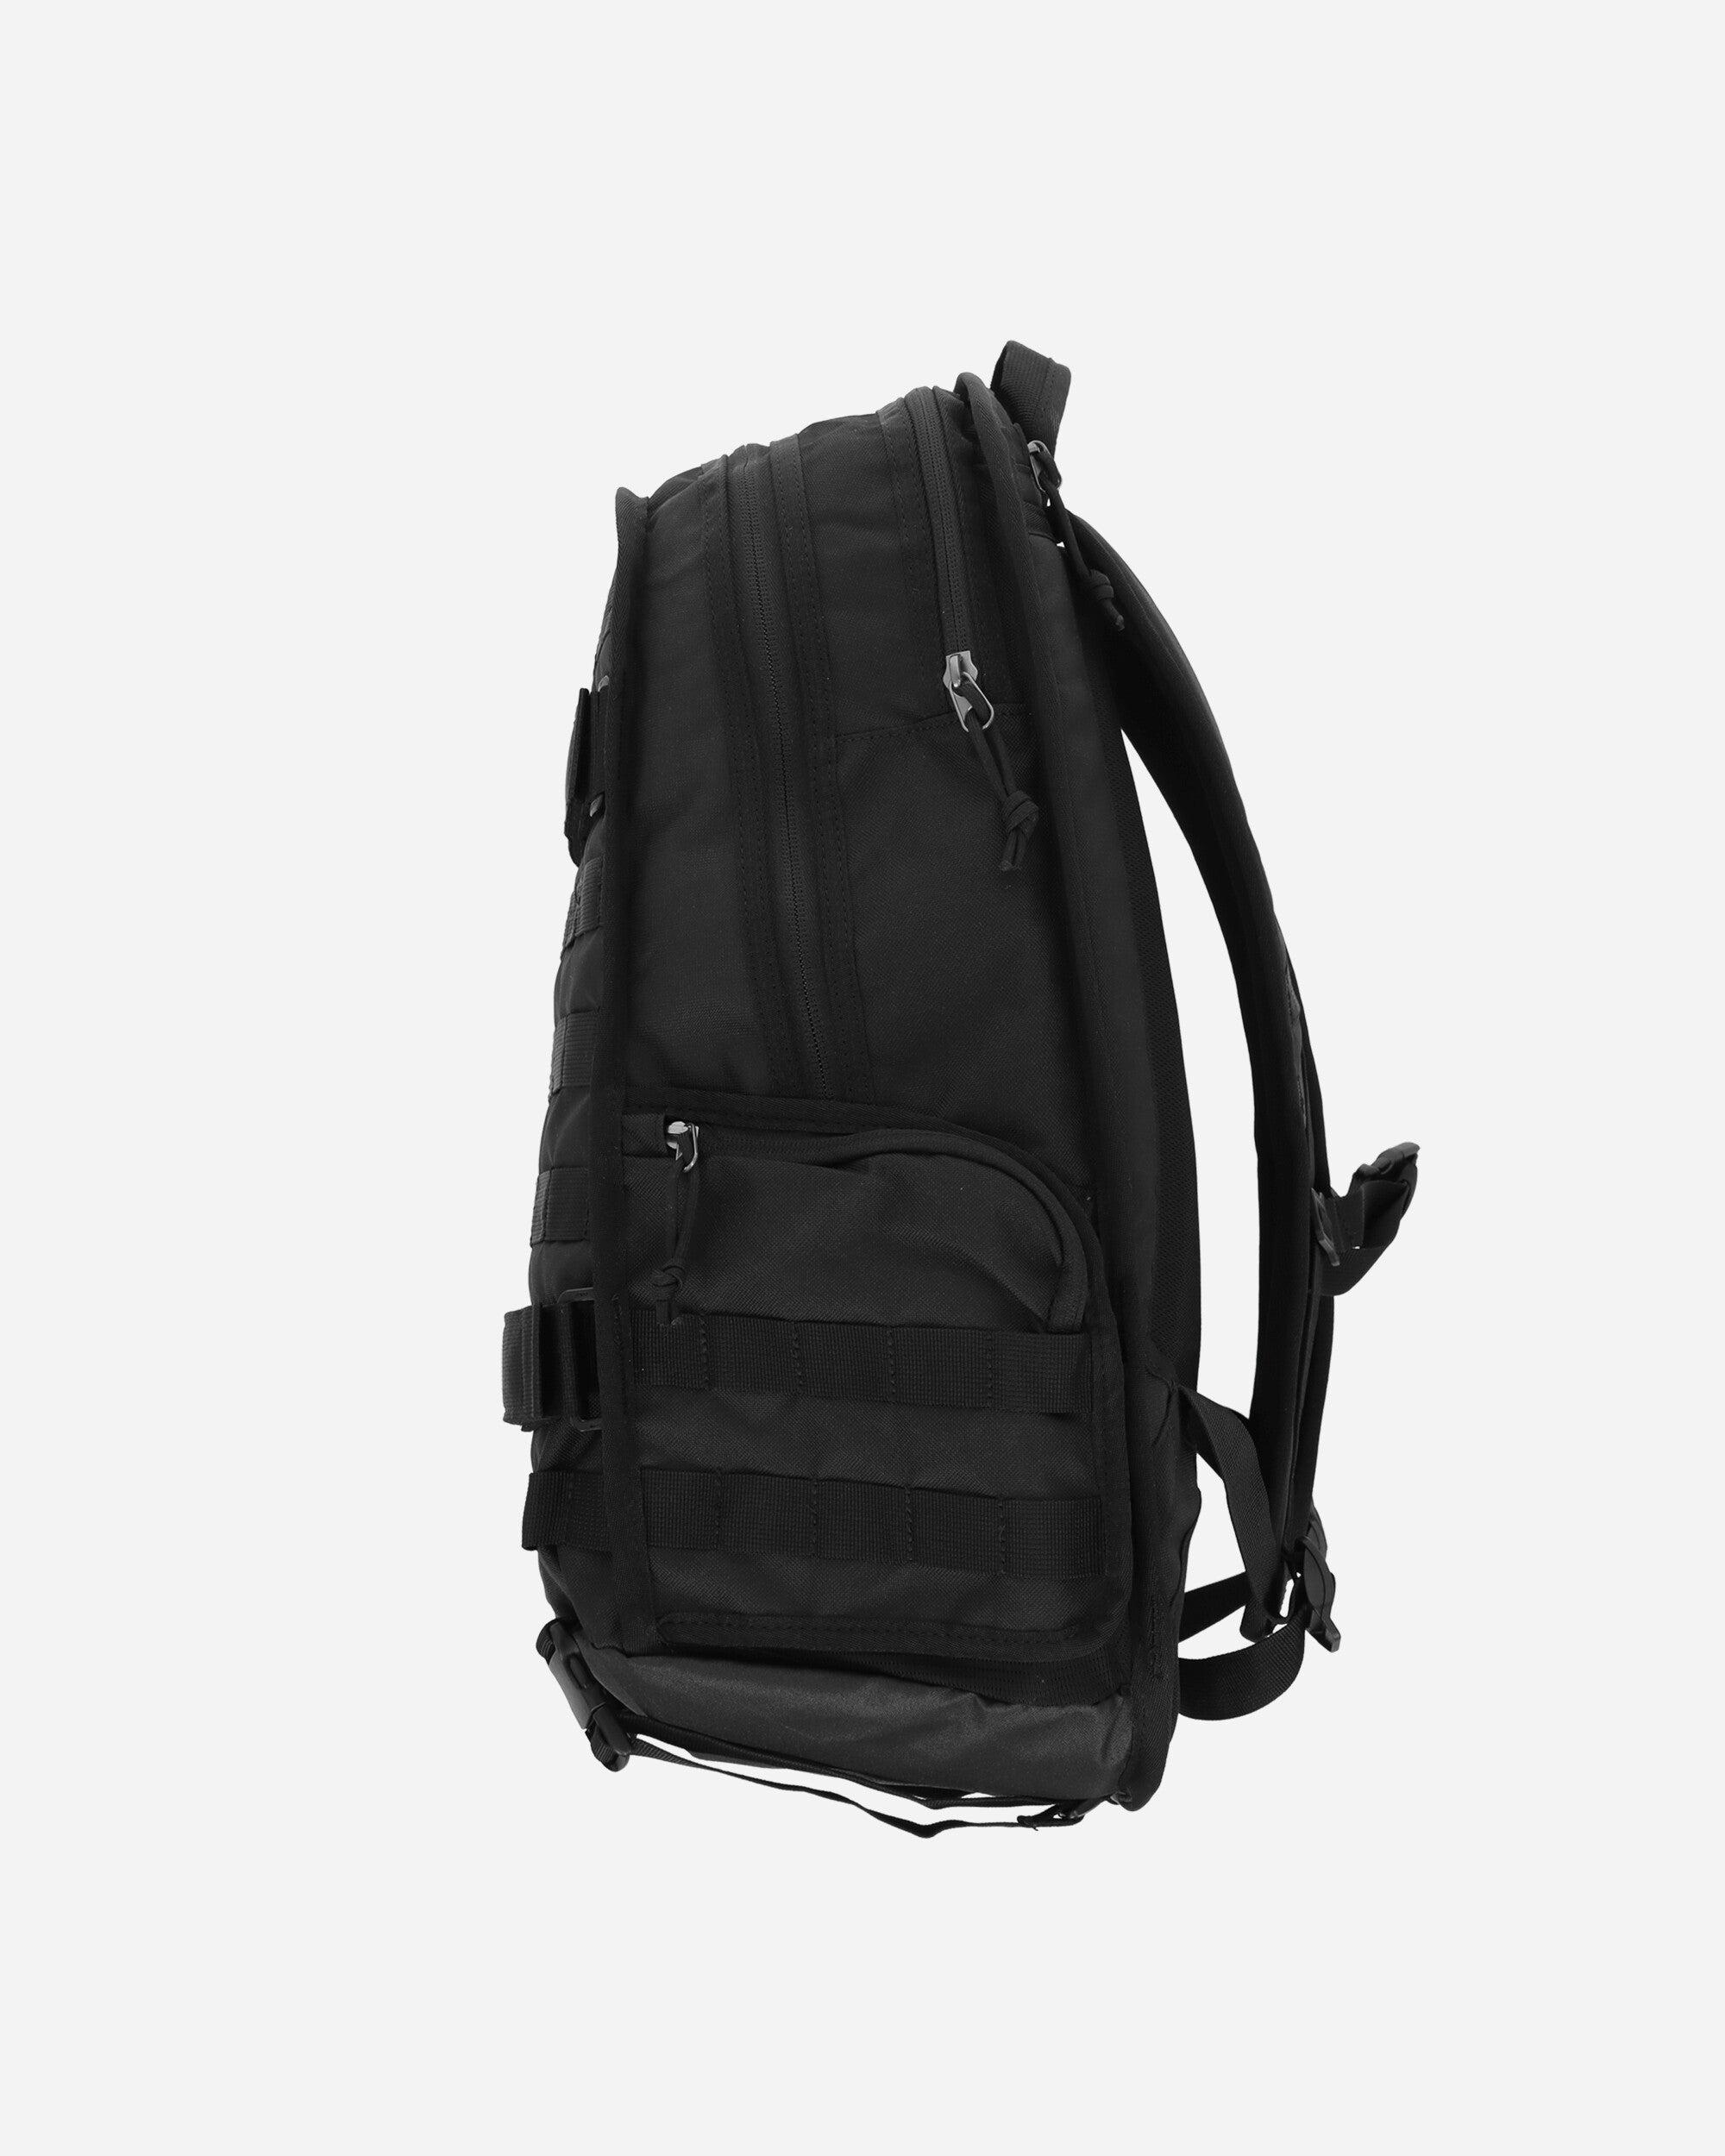 consensus hack Geest Nike Rpm Backpack Black for Men | Lyst